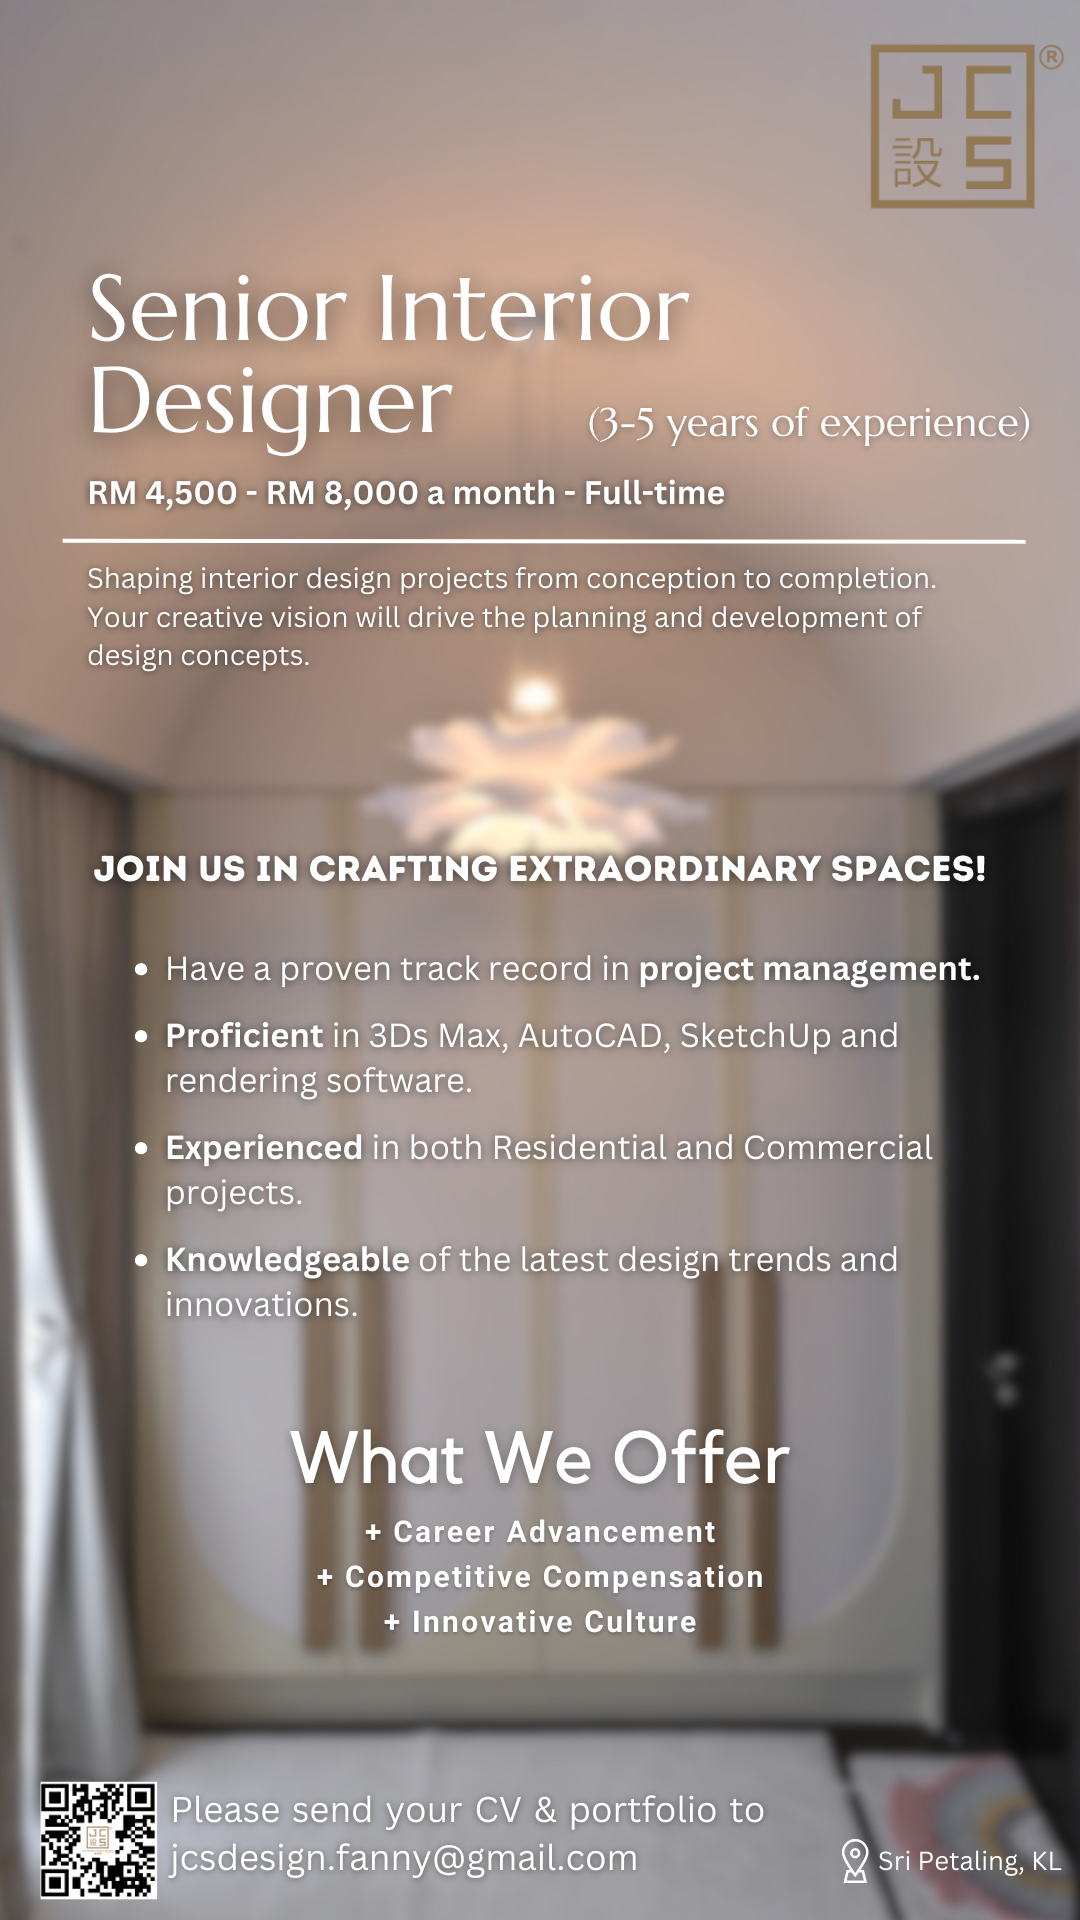 “sYe]e RM 8,000 a month - Full-time

g Interior design
reative vision w
design concepts

 

re.